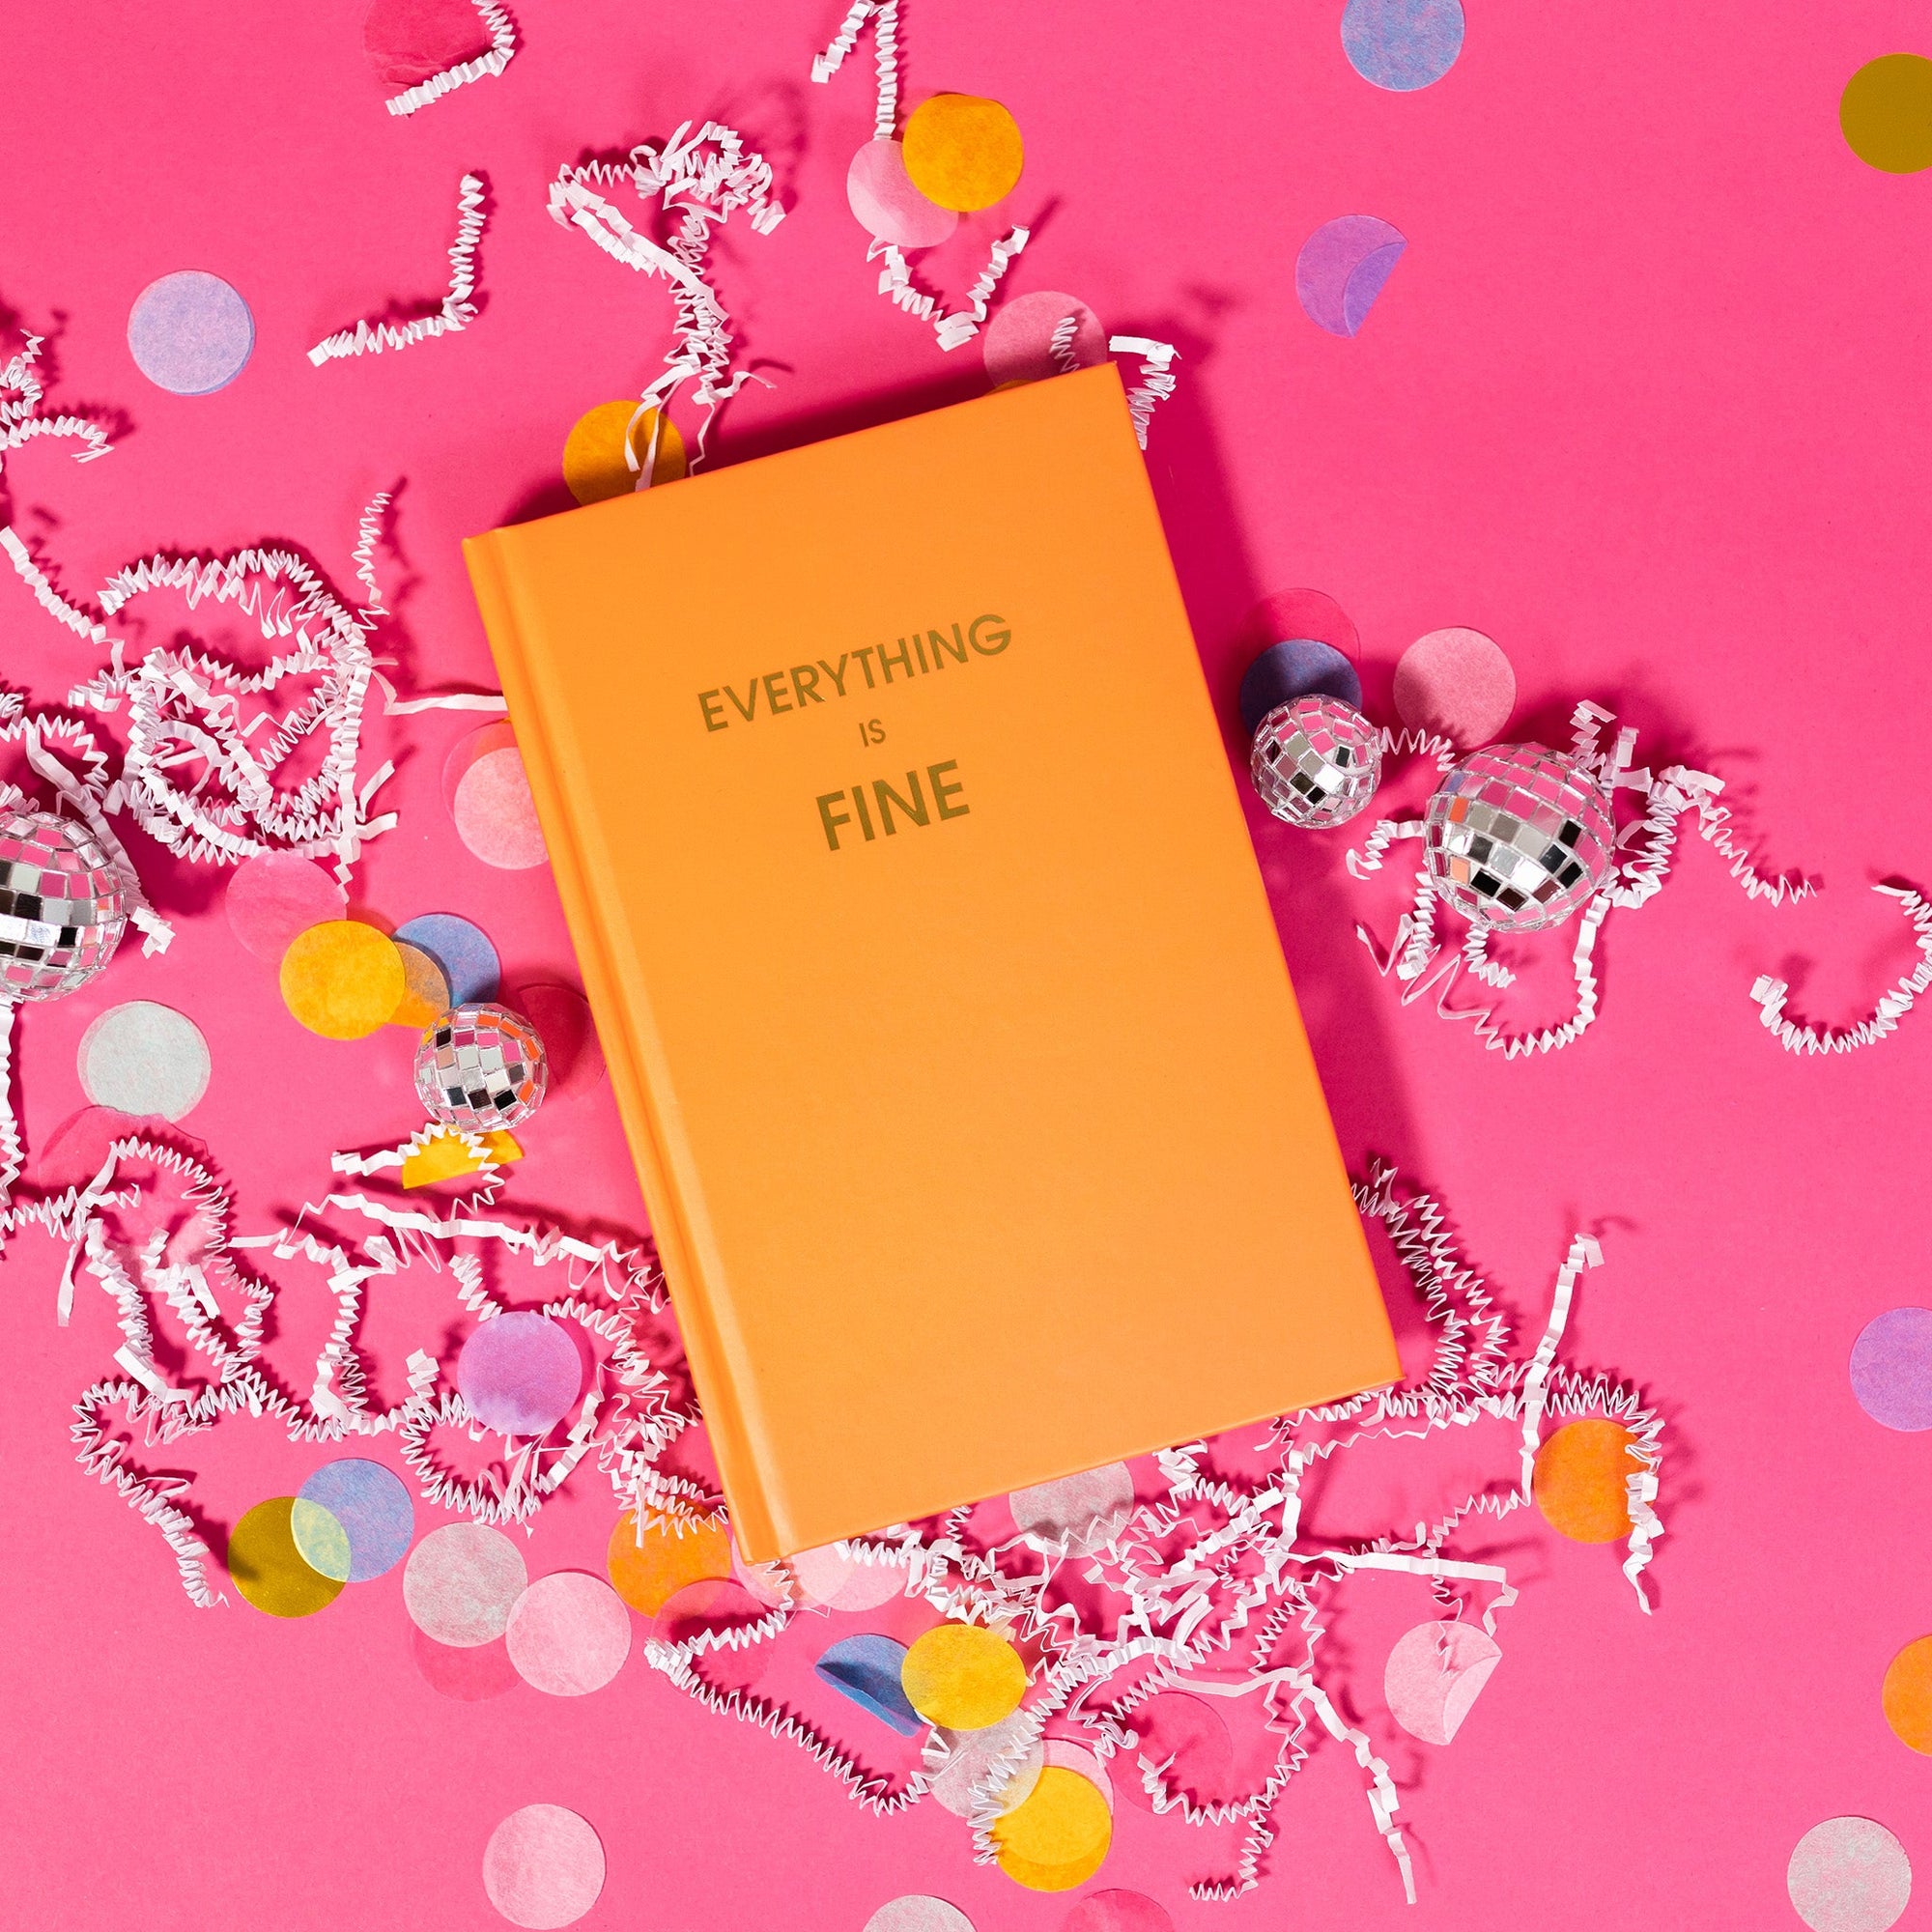 On a hot pink background sits a journal with white crinkle and big, colorful confetti scattered around. There are mini disco balls. This orange journal says "EVERYTHING IS FINE" in gold, all caps block font.